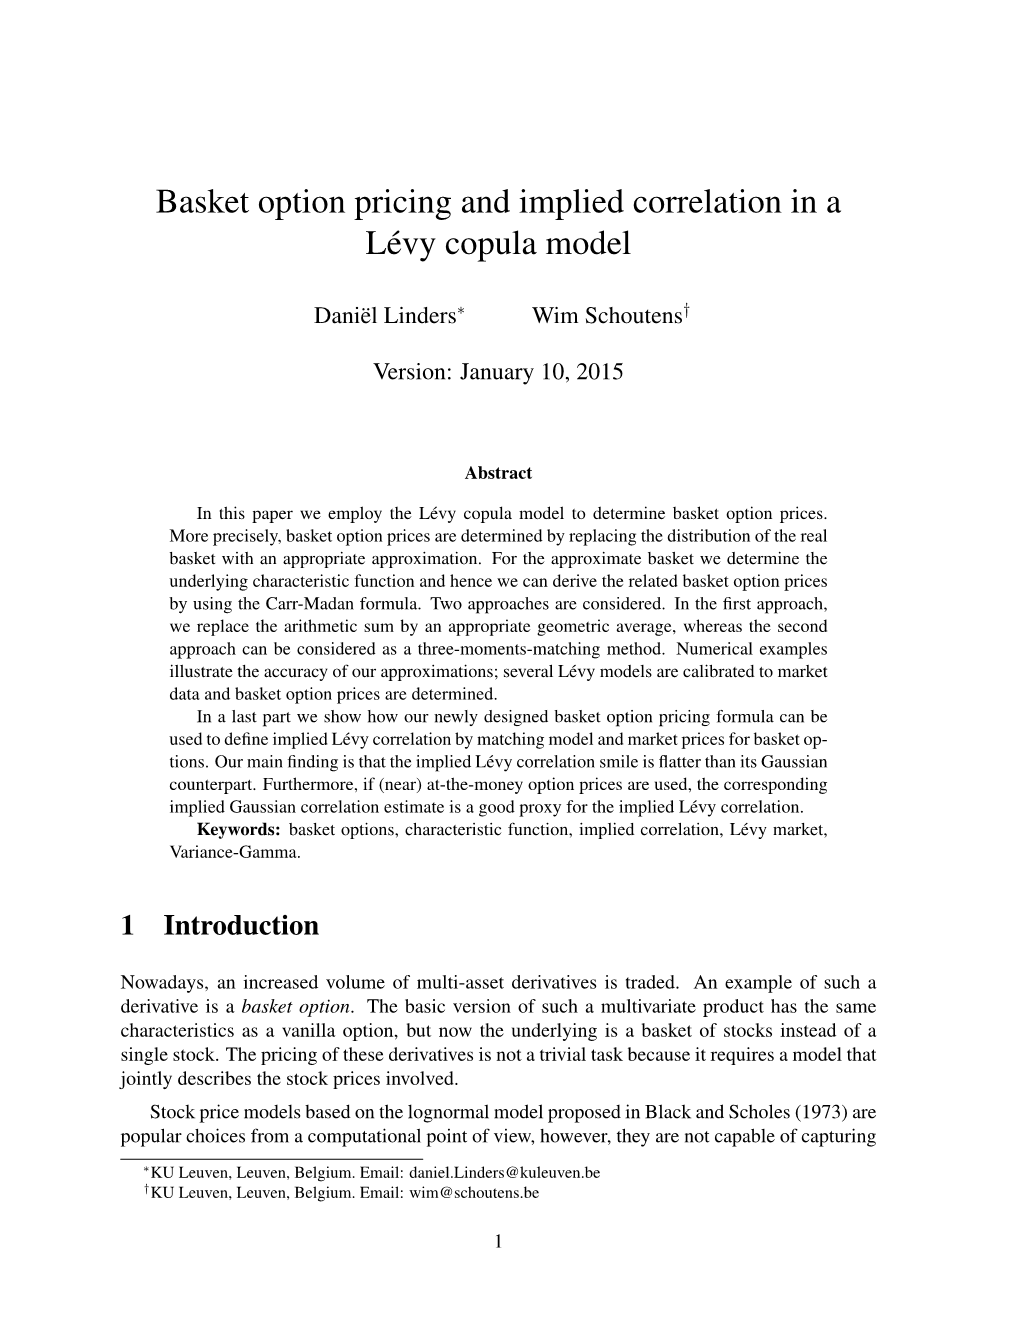 Basket Option Pricing and Implied Correlation in a Lévy Copula Model